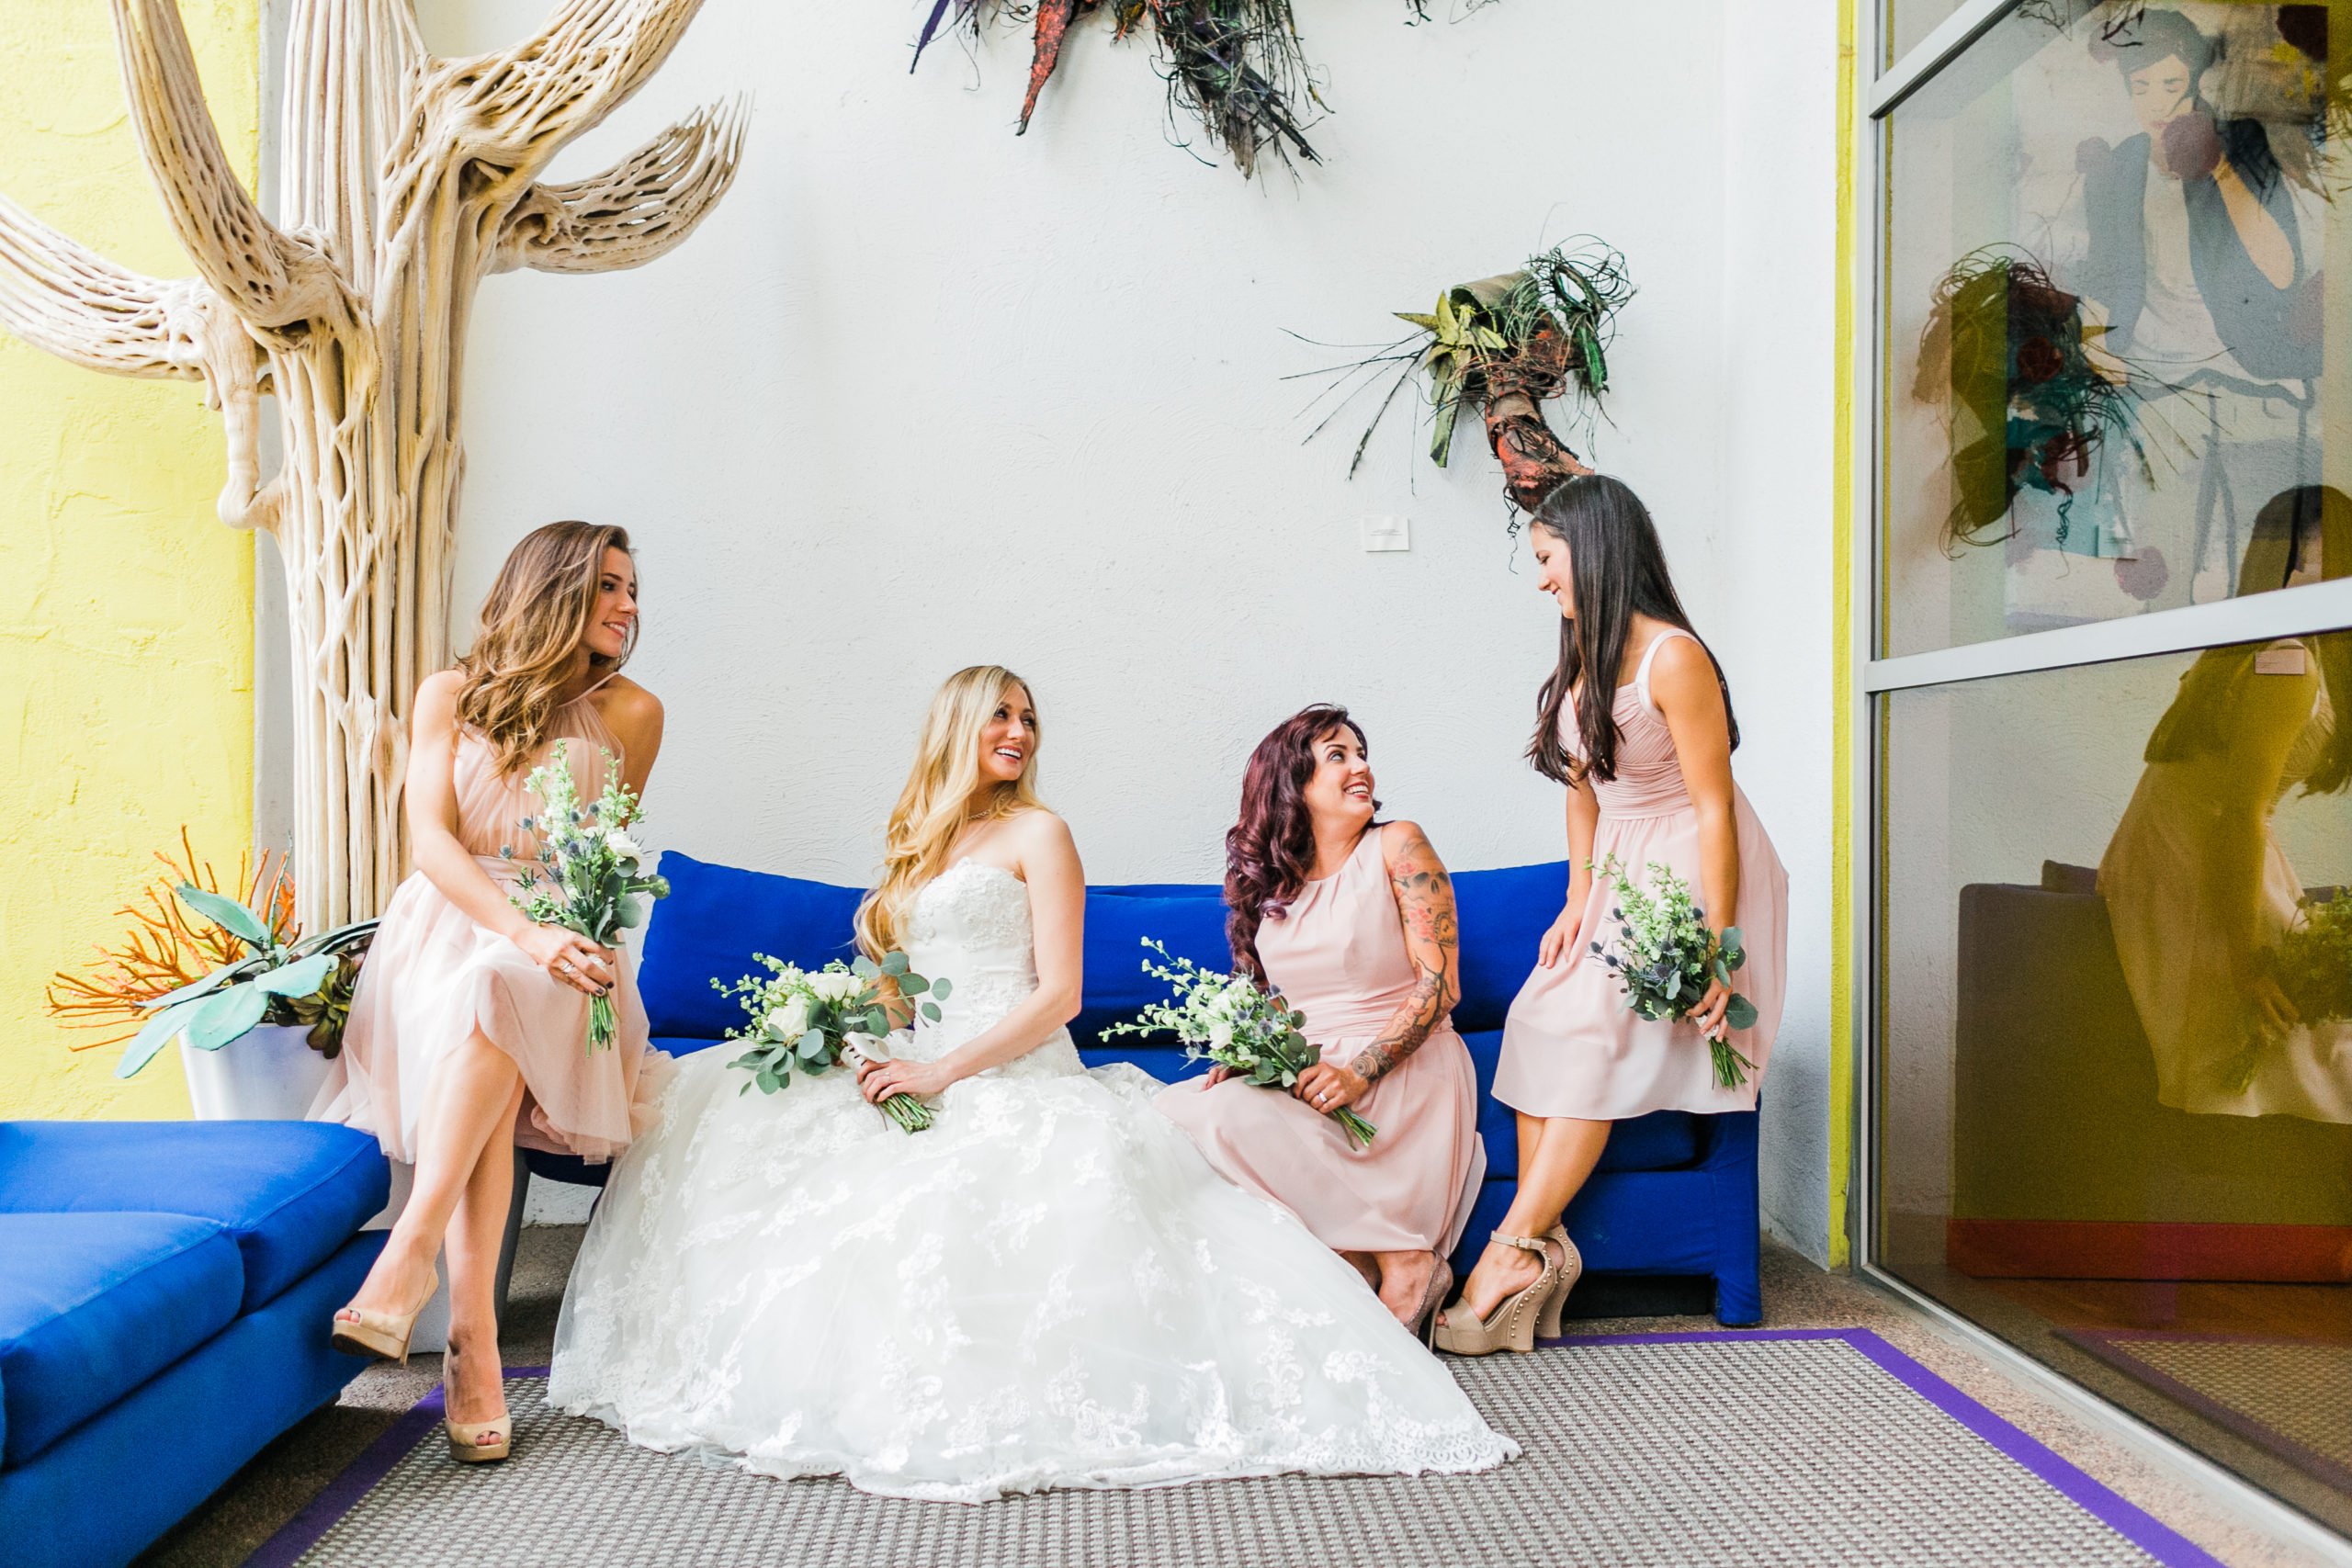 Bridal party styled session with pale pink bridesmaid dresses